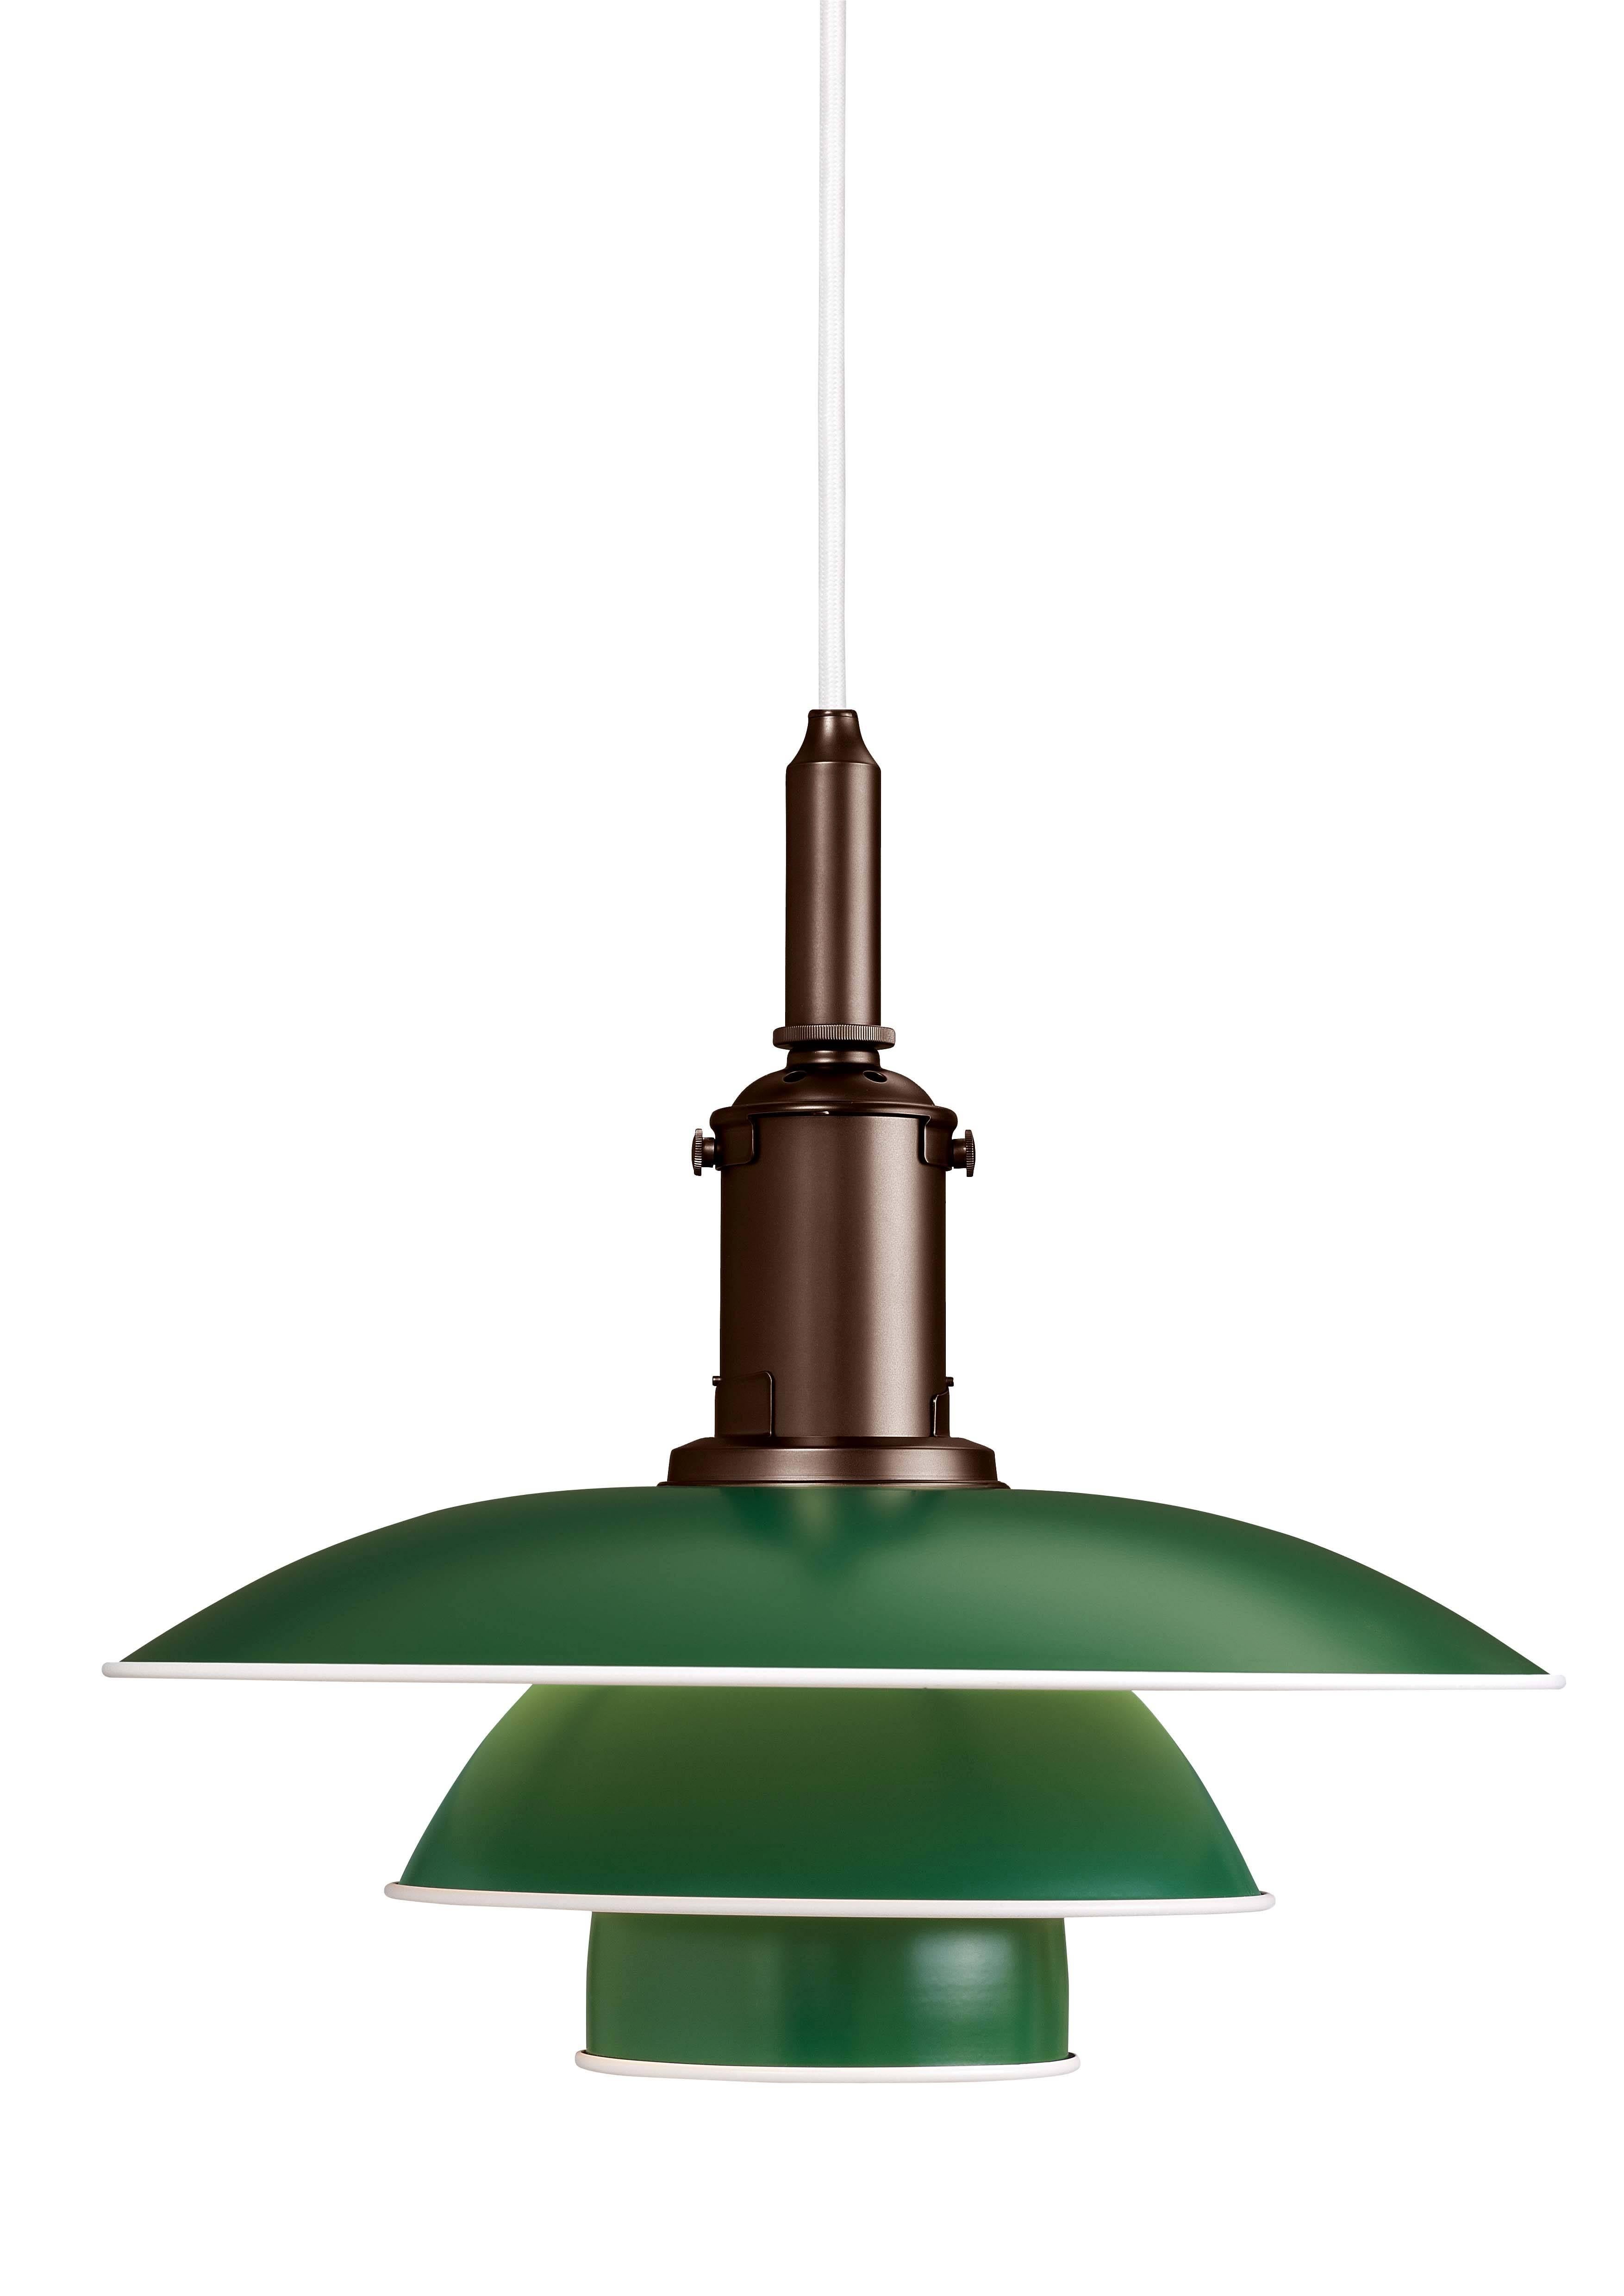 The PH 3½-3 pendants are an addition to the Louis Poulsen PH collection and are based on Poul Henningsen's original drawings from the late 1920s and early 1930s, featuring his renowned three-shade system.

The pendant has metal shades, available